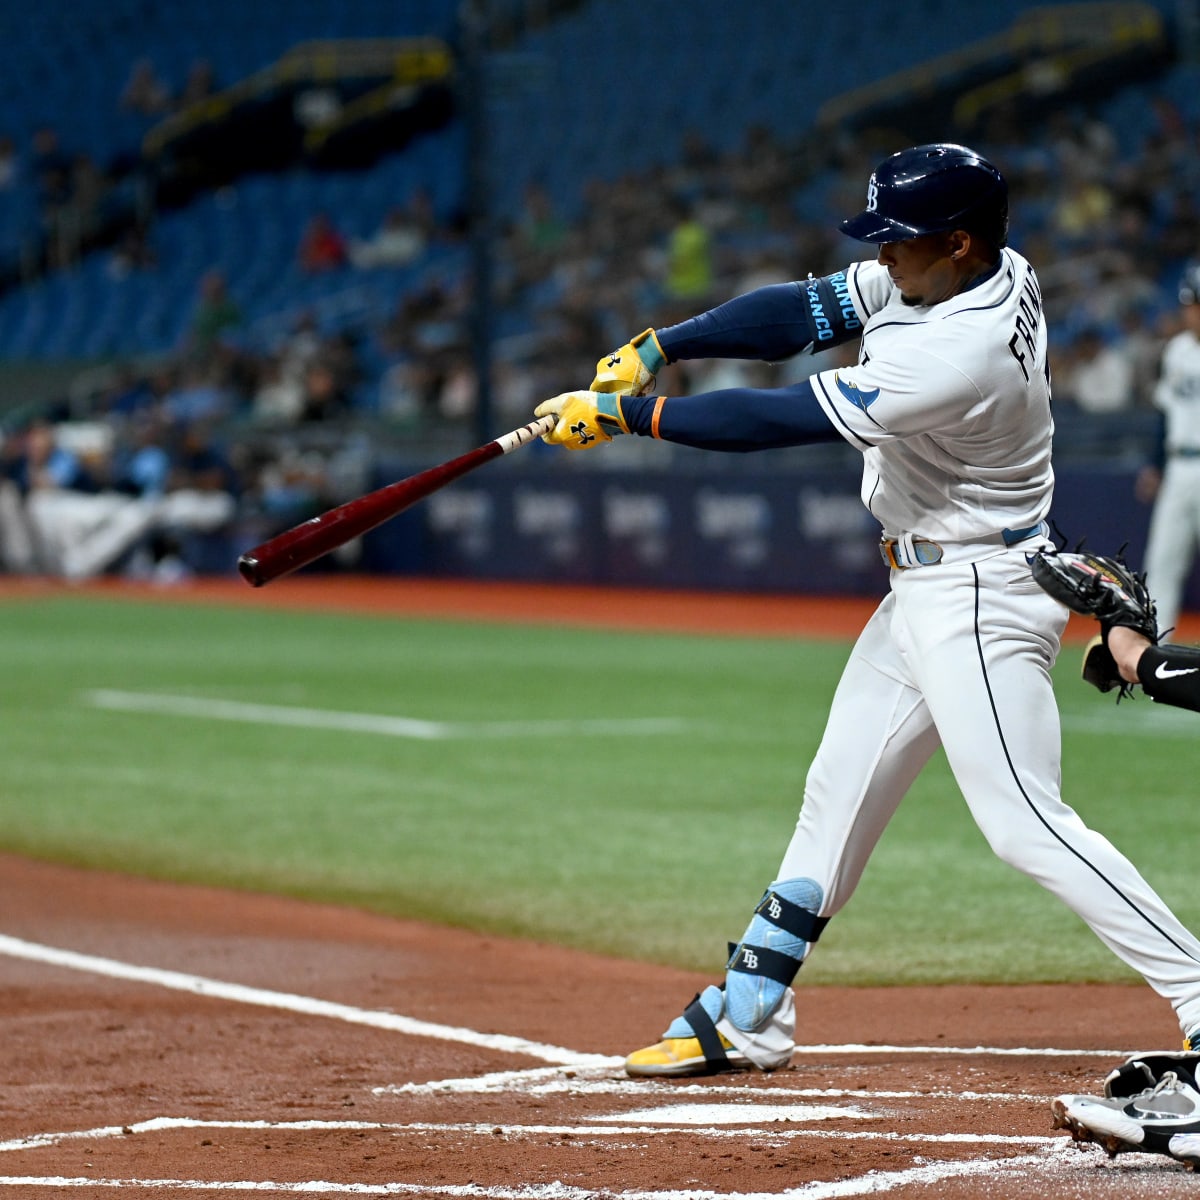 Wander Franco flips ground ball to himself, Wander's smooth with it, By  Tampa Bay Rays